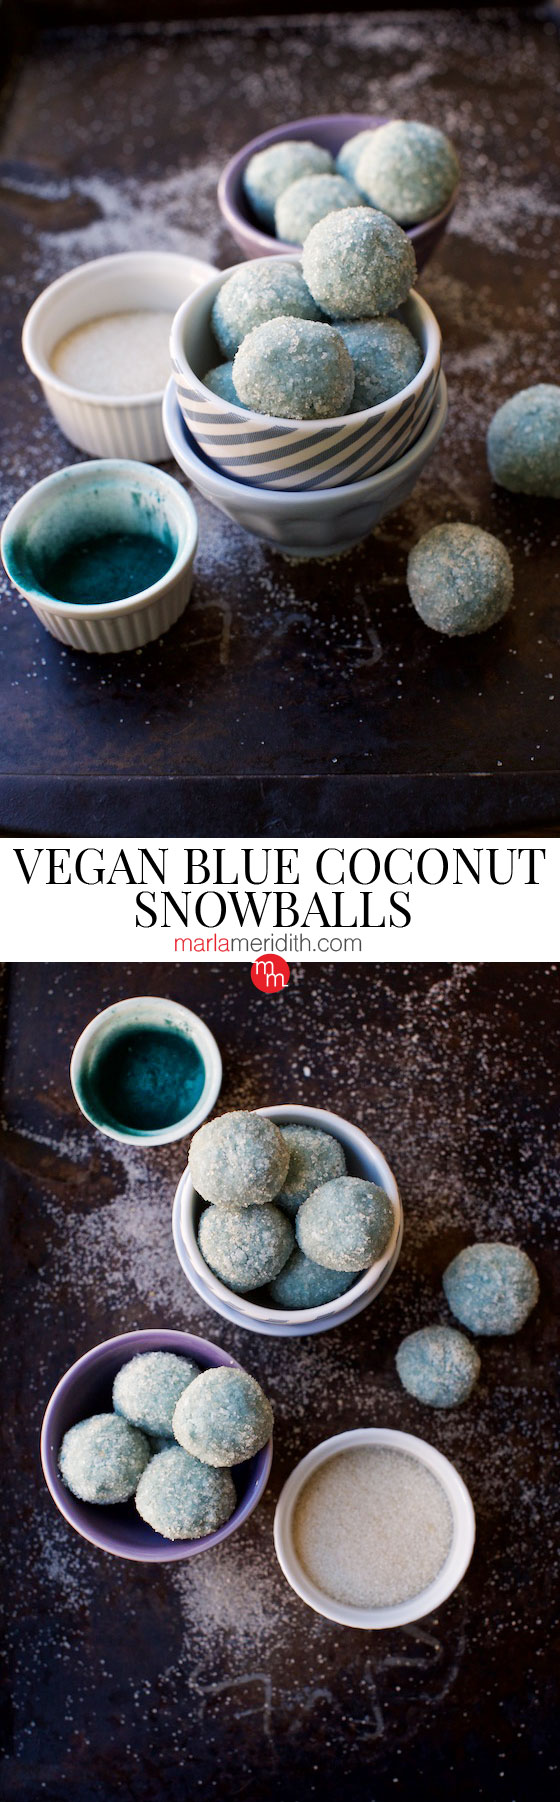 Vegan Blue Coconut Snowballs recipe. A delicious no-bake treat for the holidays or anytime! MarlaMeridith.com ( @marlameridith ) #recipe #vegan #coconut